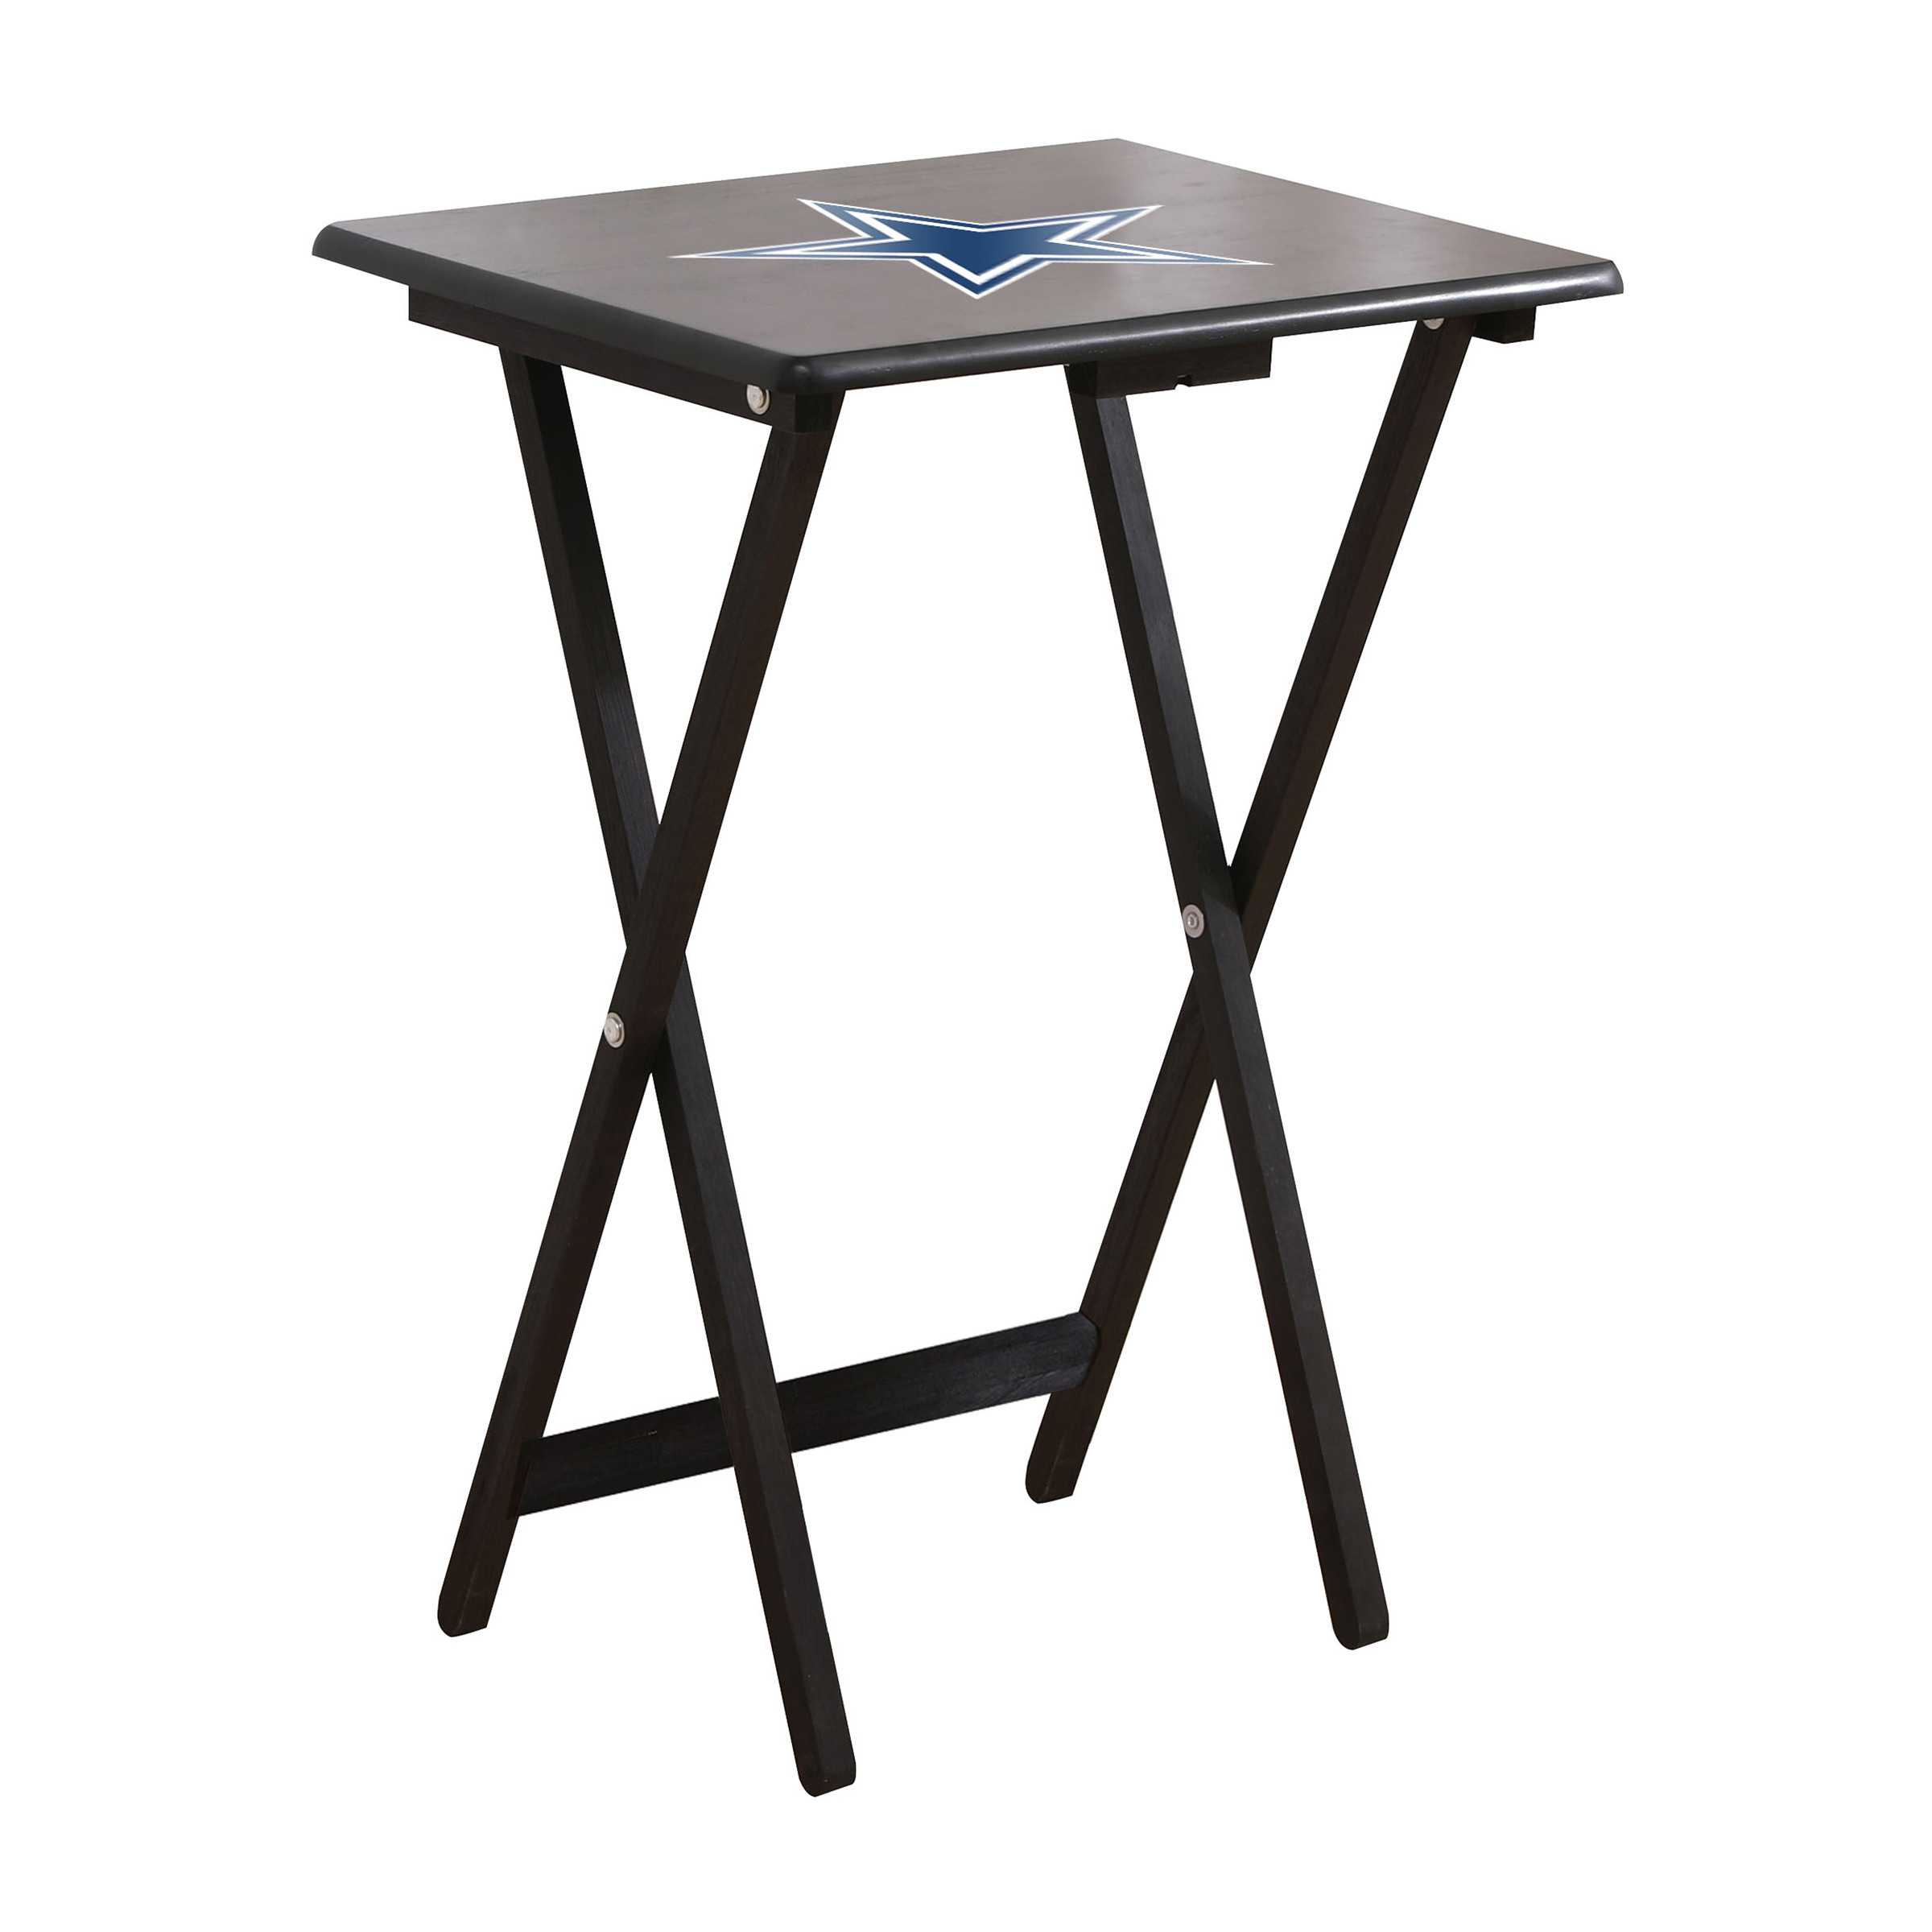 DALLAS COWBOYS 4 TV TRAYS WITH STAND